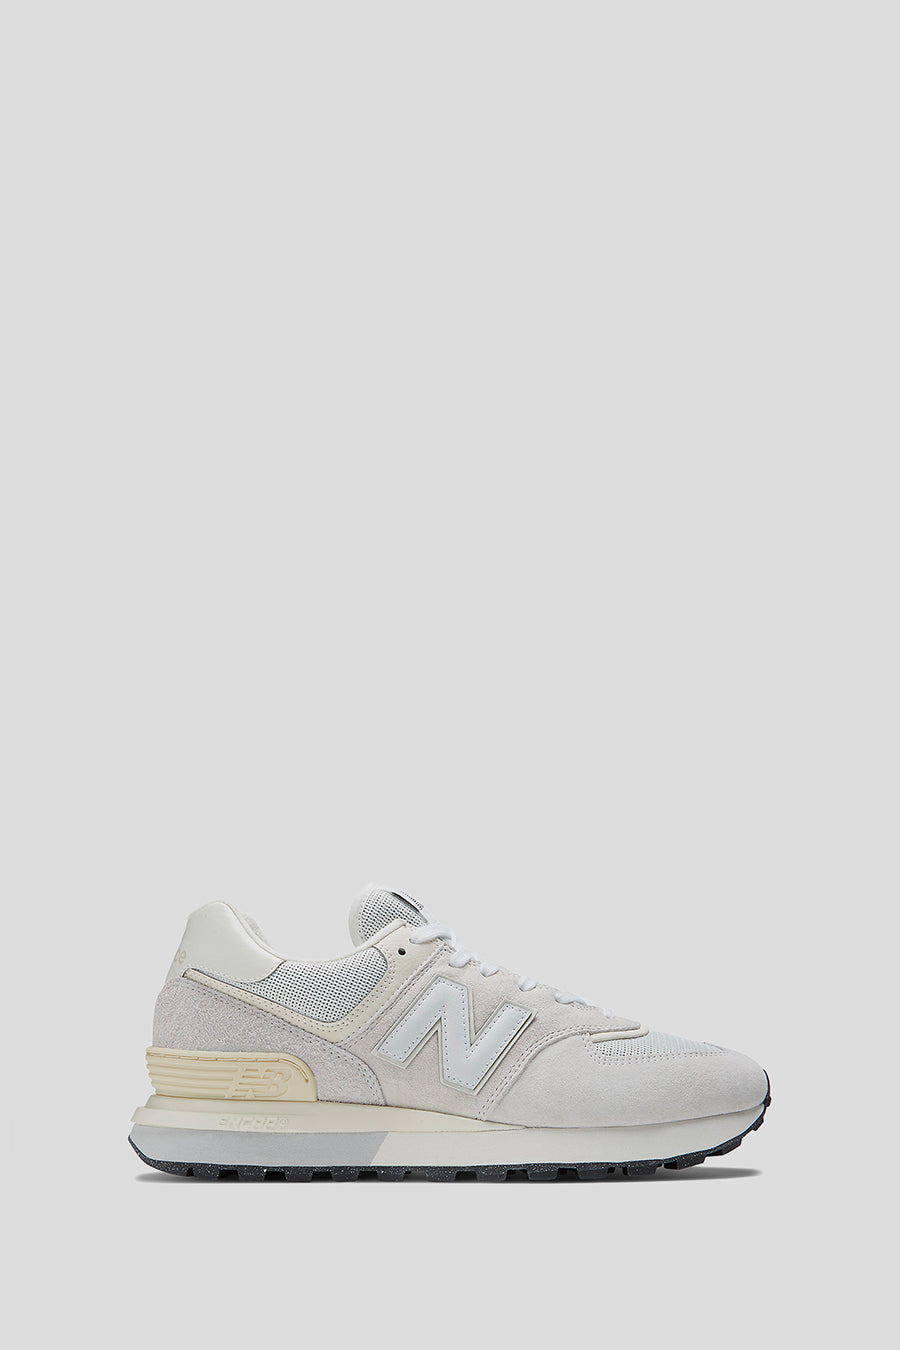 NEW BALANCE - SNEAKERS 574 BLANCHE - LE LABO STORE